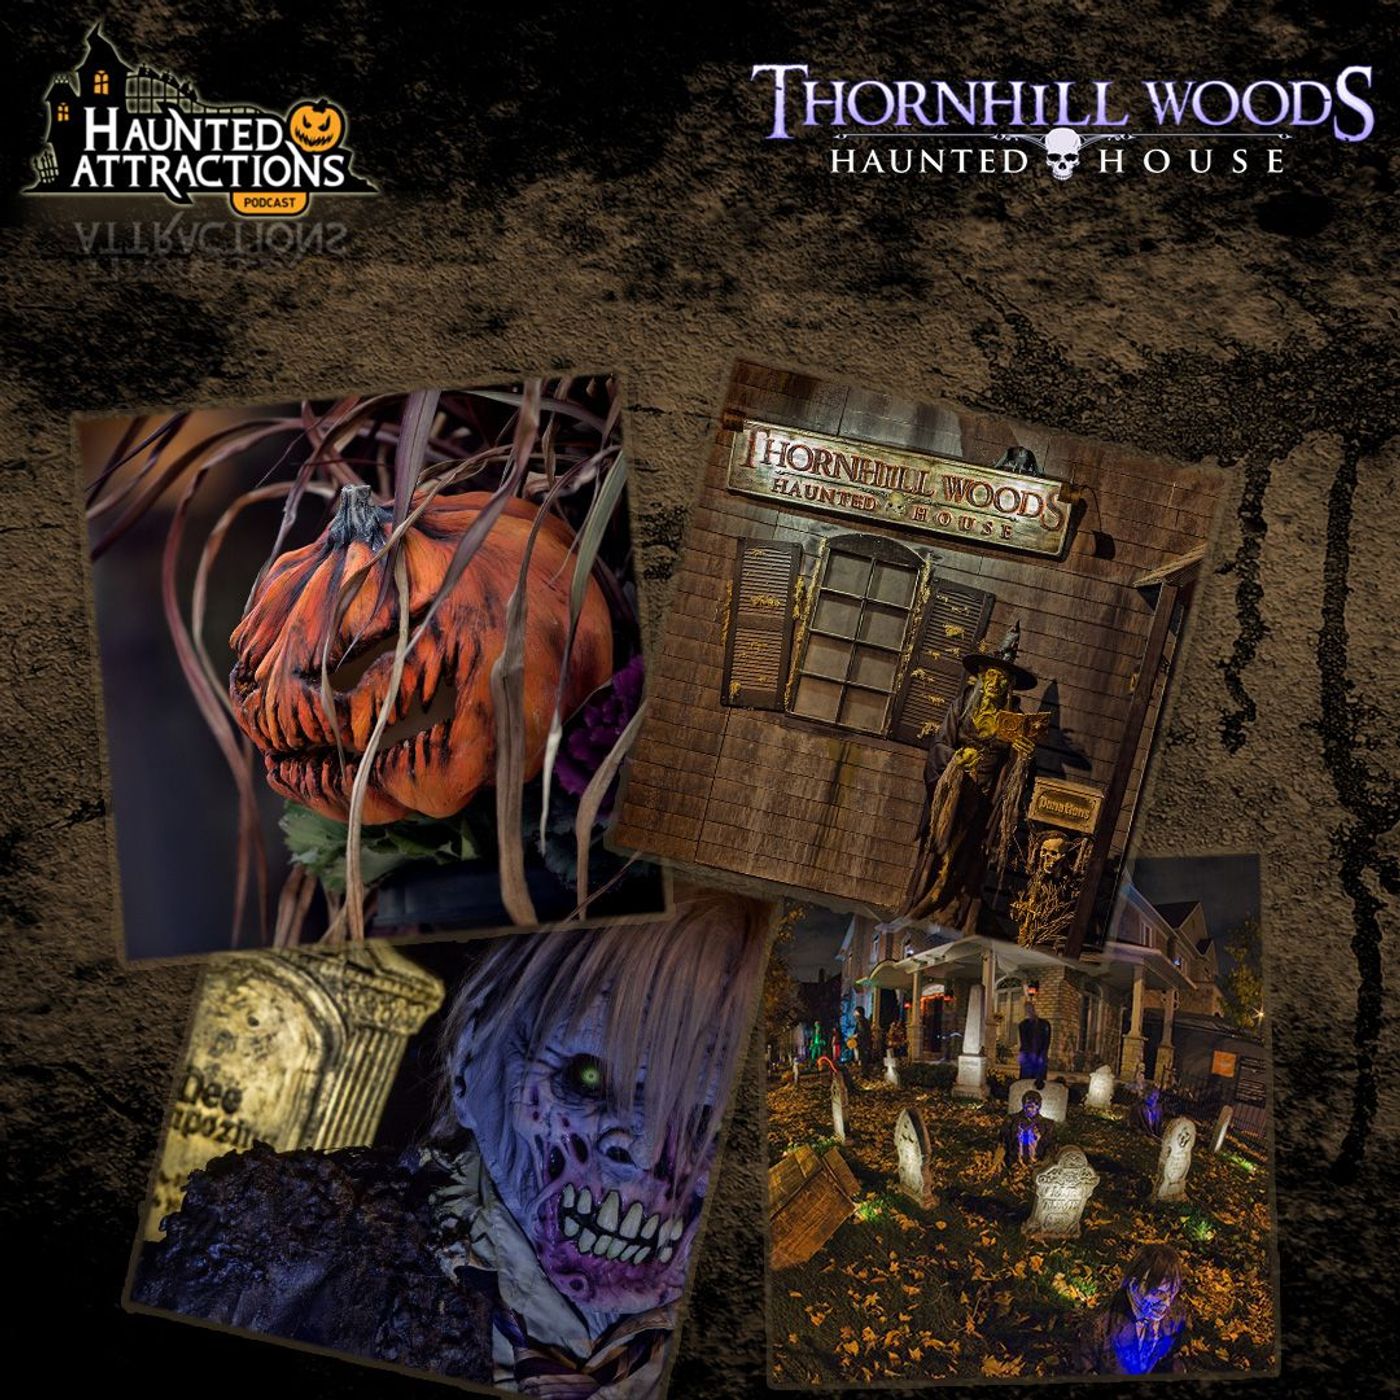 Thornhill Woods Haunted House in Ontario, Canada - Scaring For The Children!